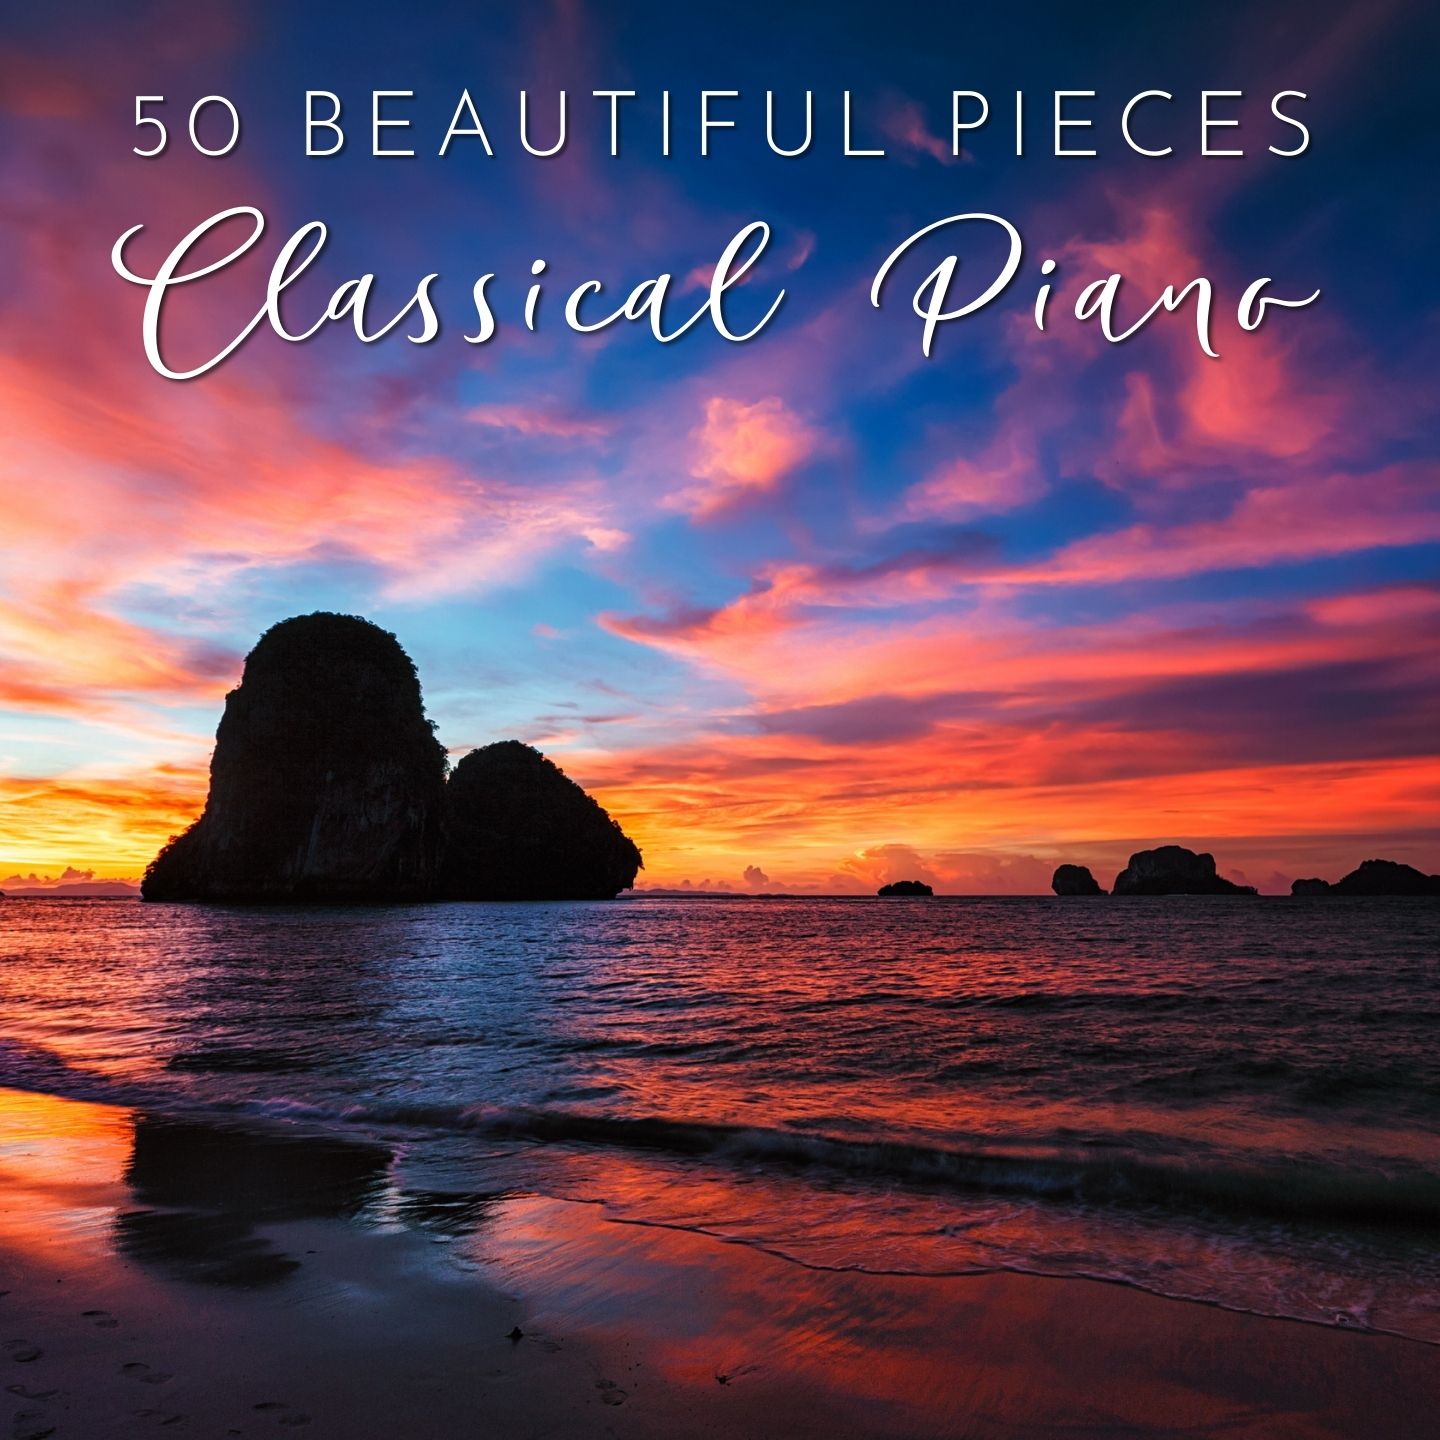 50 Most Beautiful Classical Piano Pieces